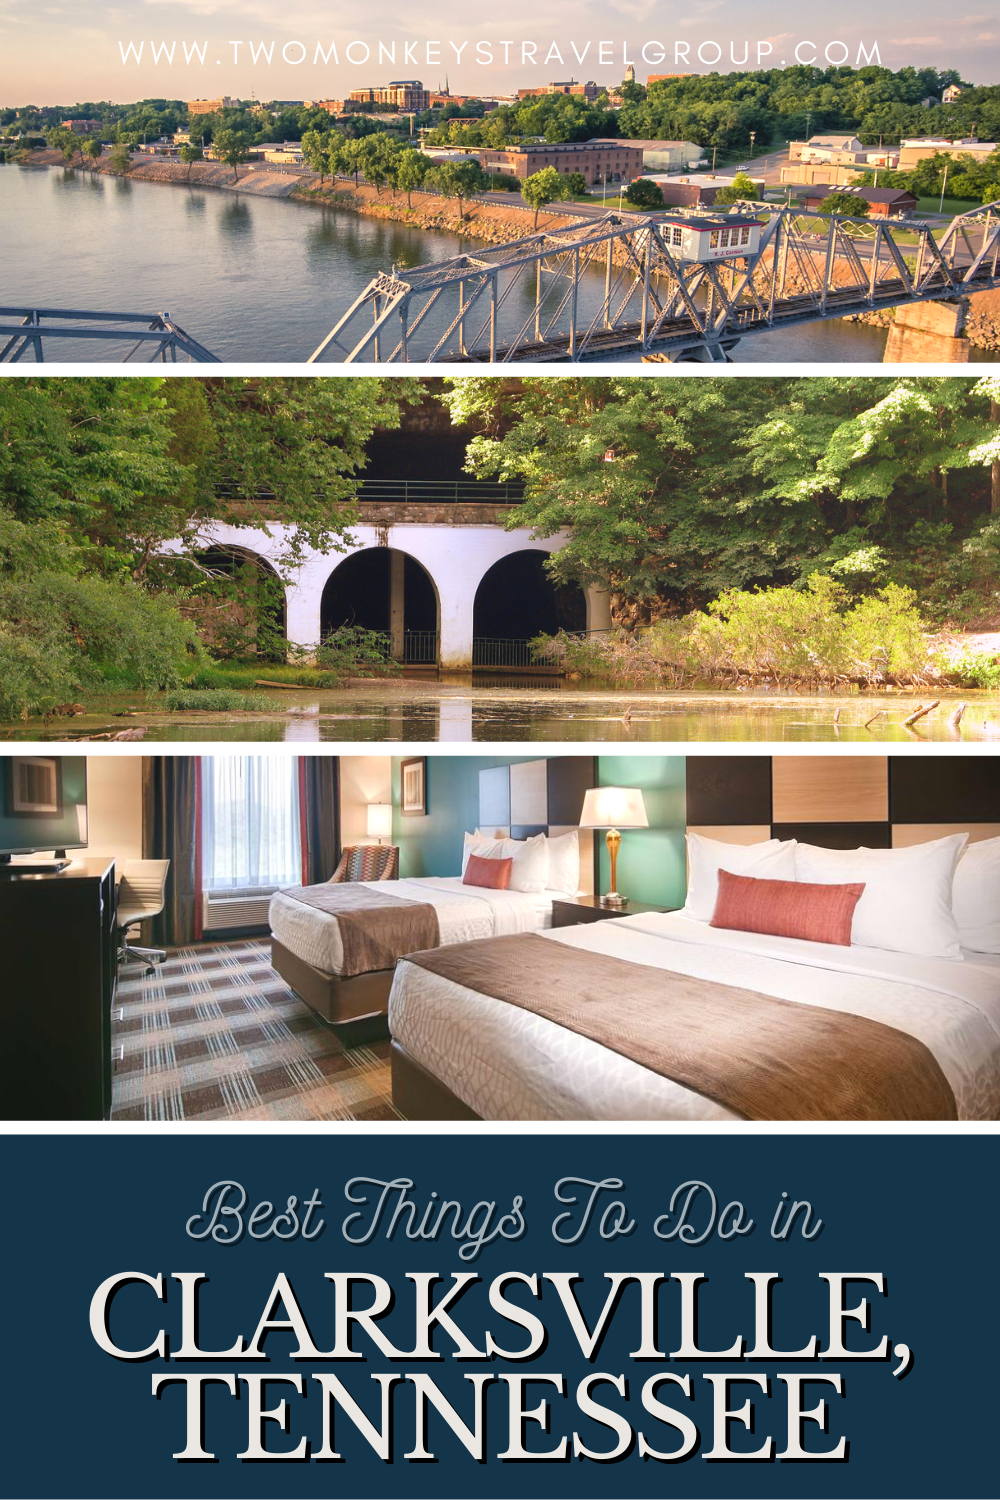 5 Best Things To Do in Clarksville, Tennessee and Where to Stay